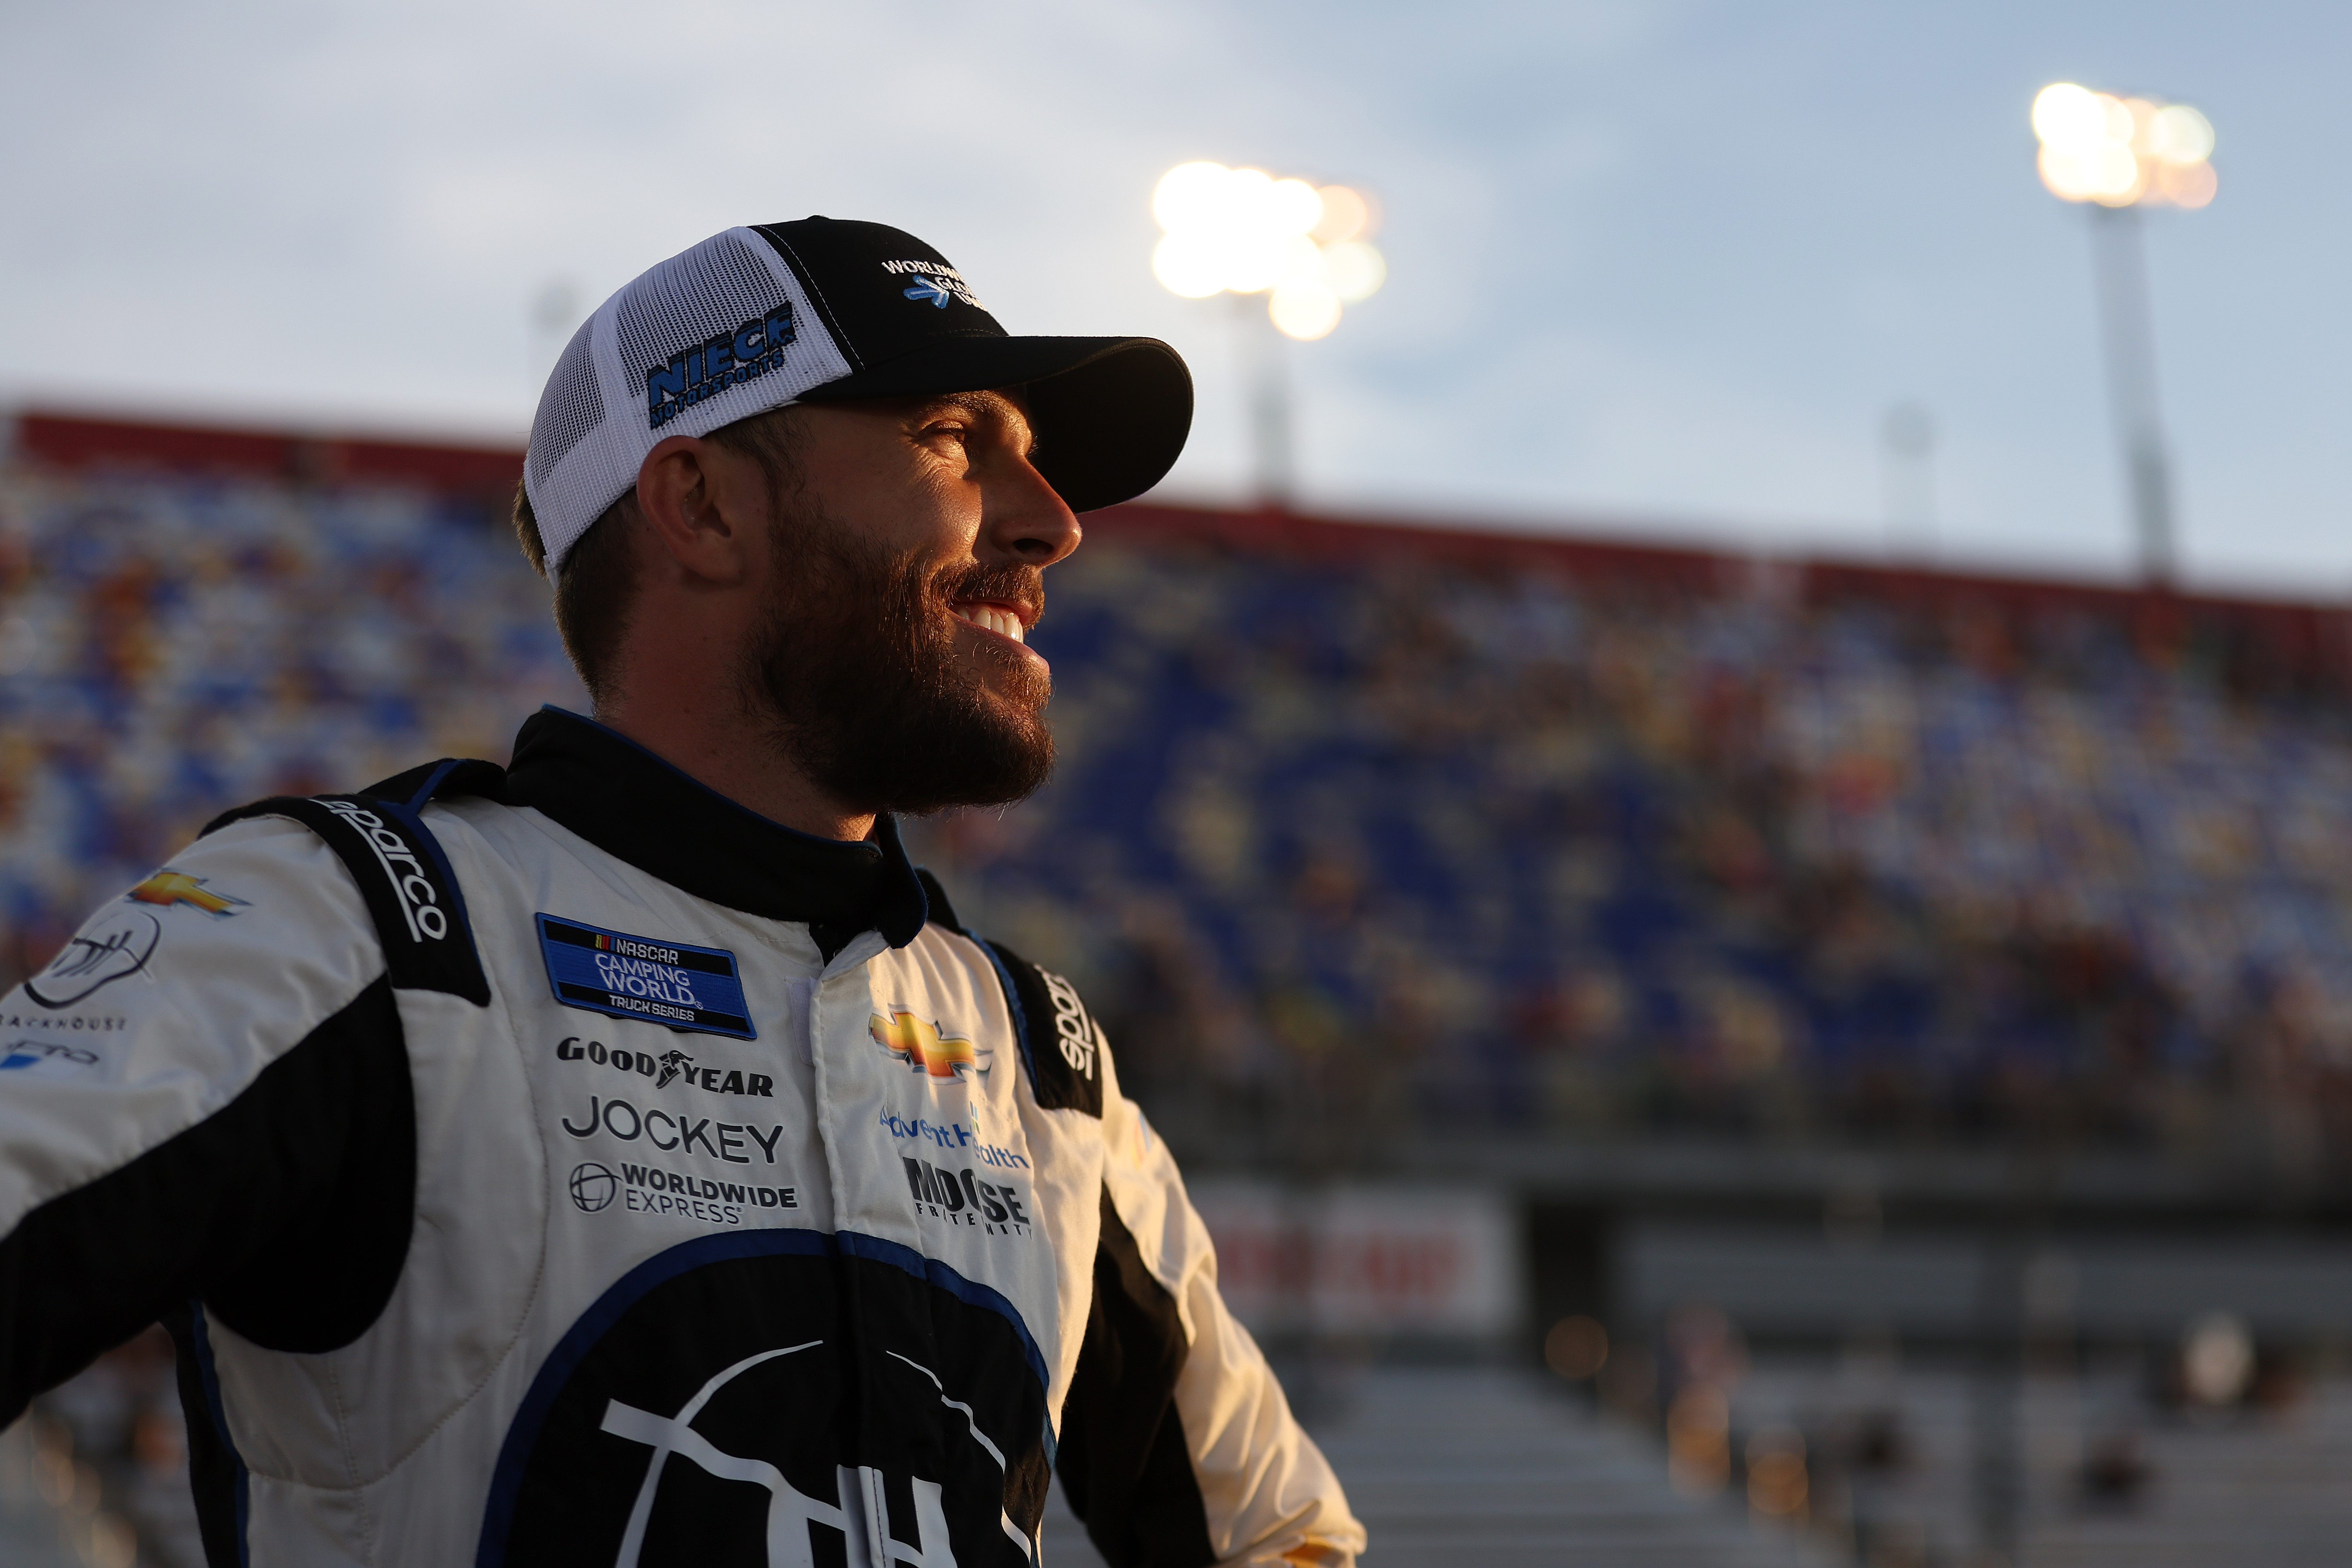 Will Ross Chastain have a smile on his face after Sunday's cutoff race at the Roval at Charlotte? (Photo by James Gilbert/Getty Images)